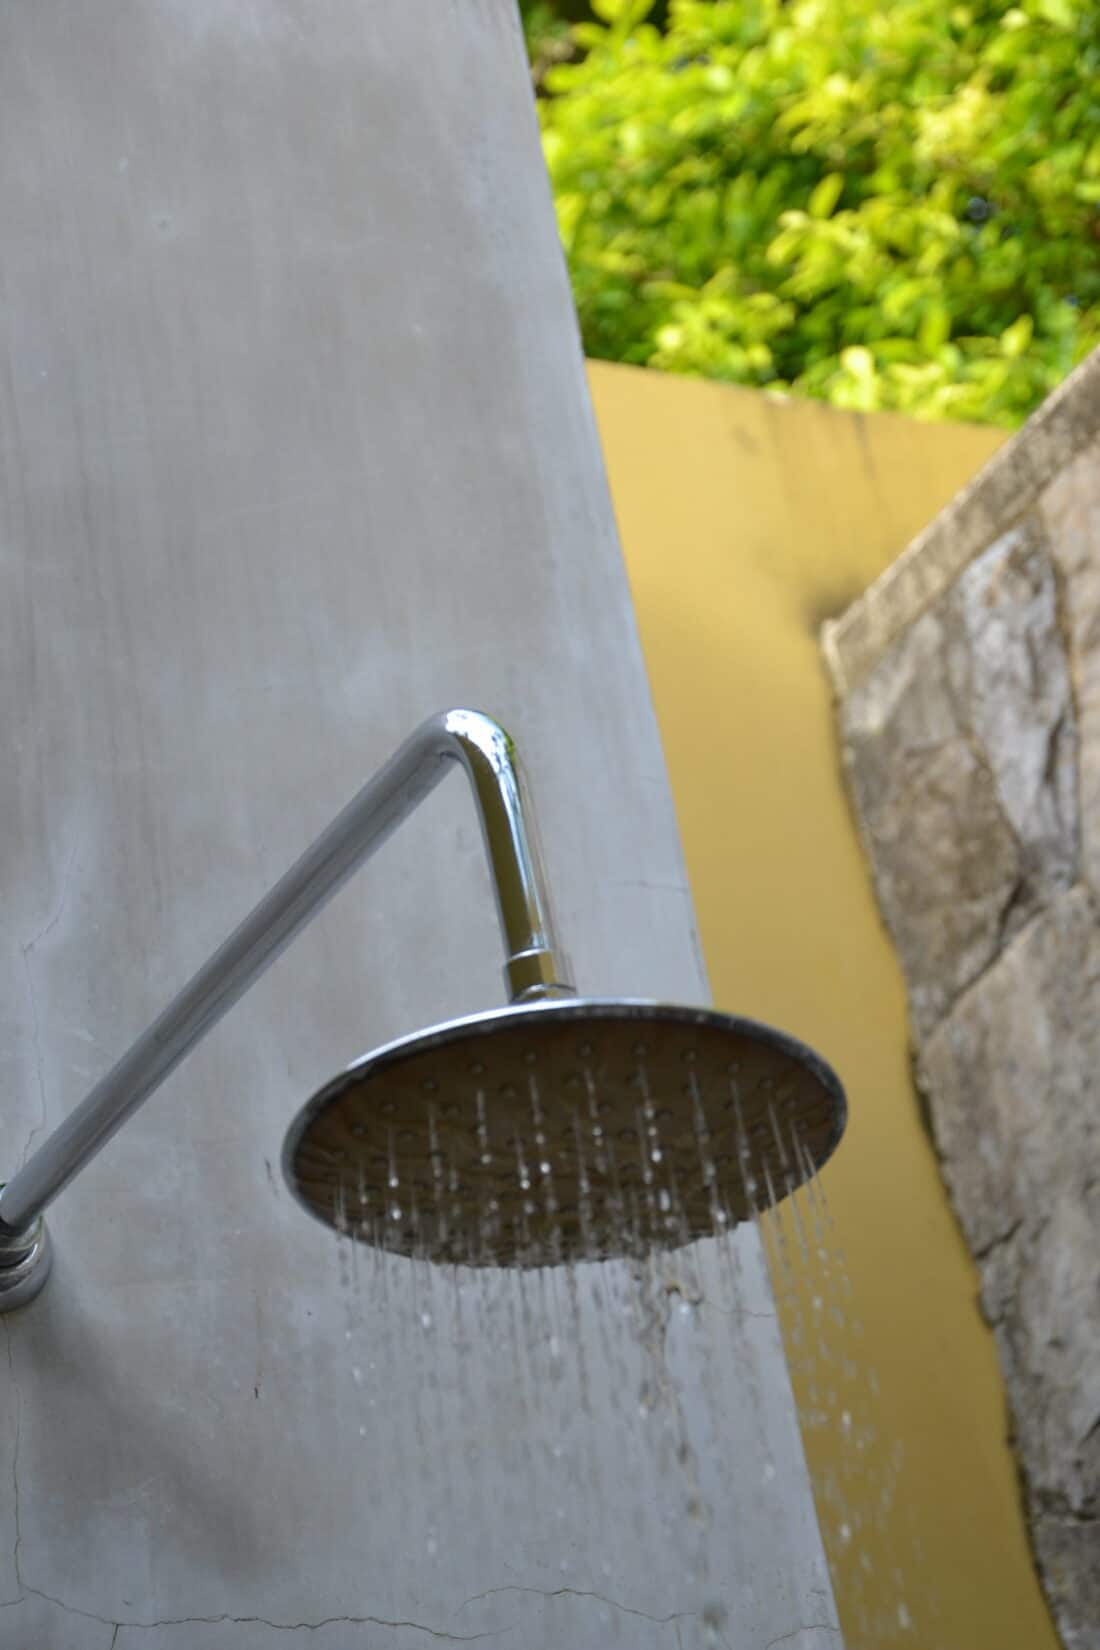 An outdoor shower head with water droplets falling, set against a blurred green and beige background, perfect for a cool-off.